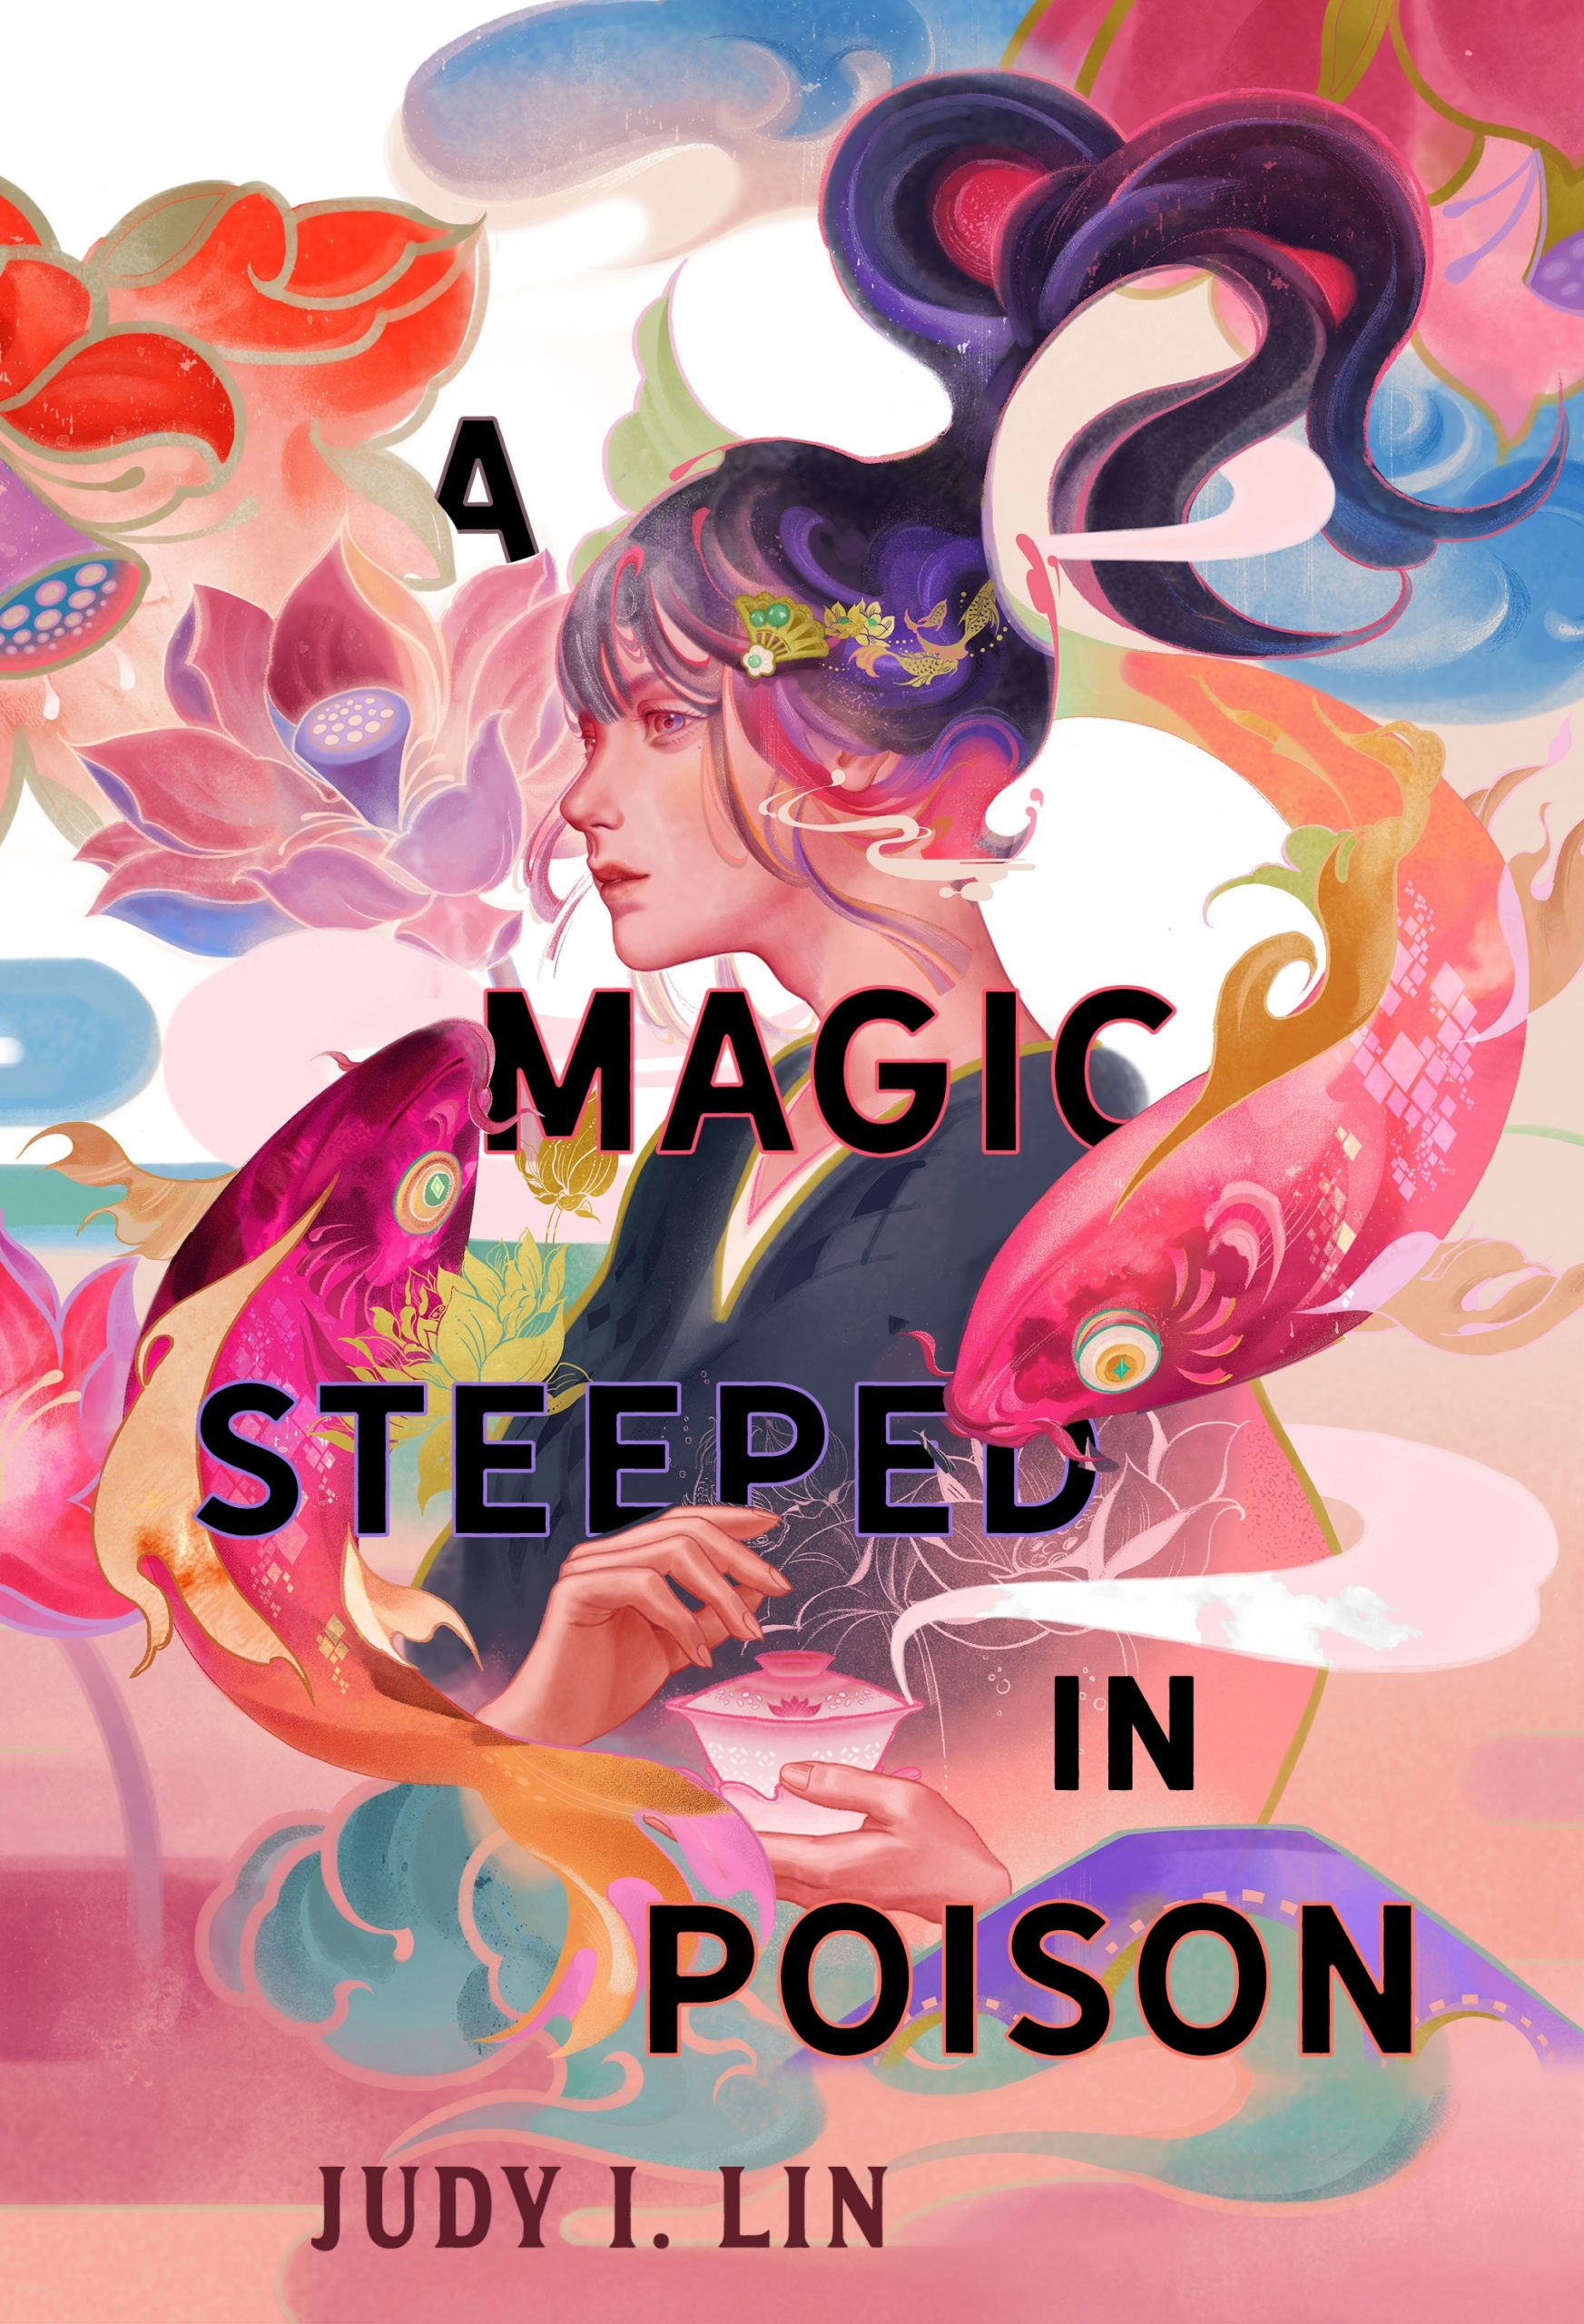 Top 5 Reasons to read A Magic Steeped in Poison by Judy I. Lin
